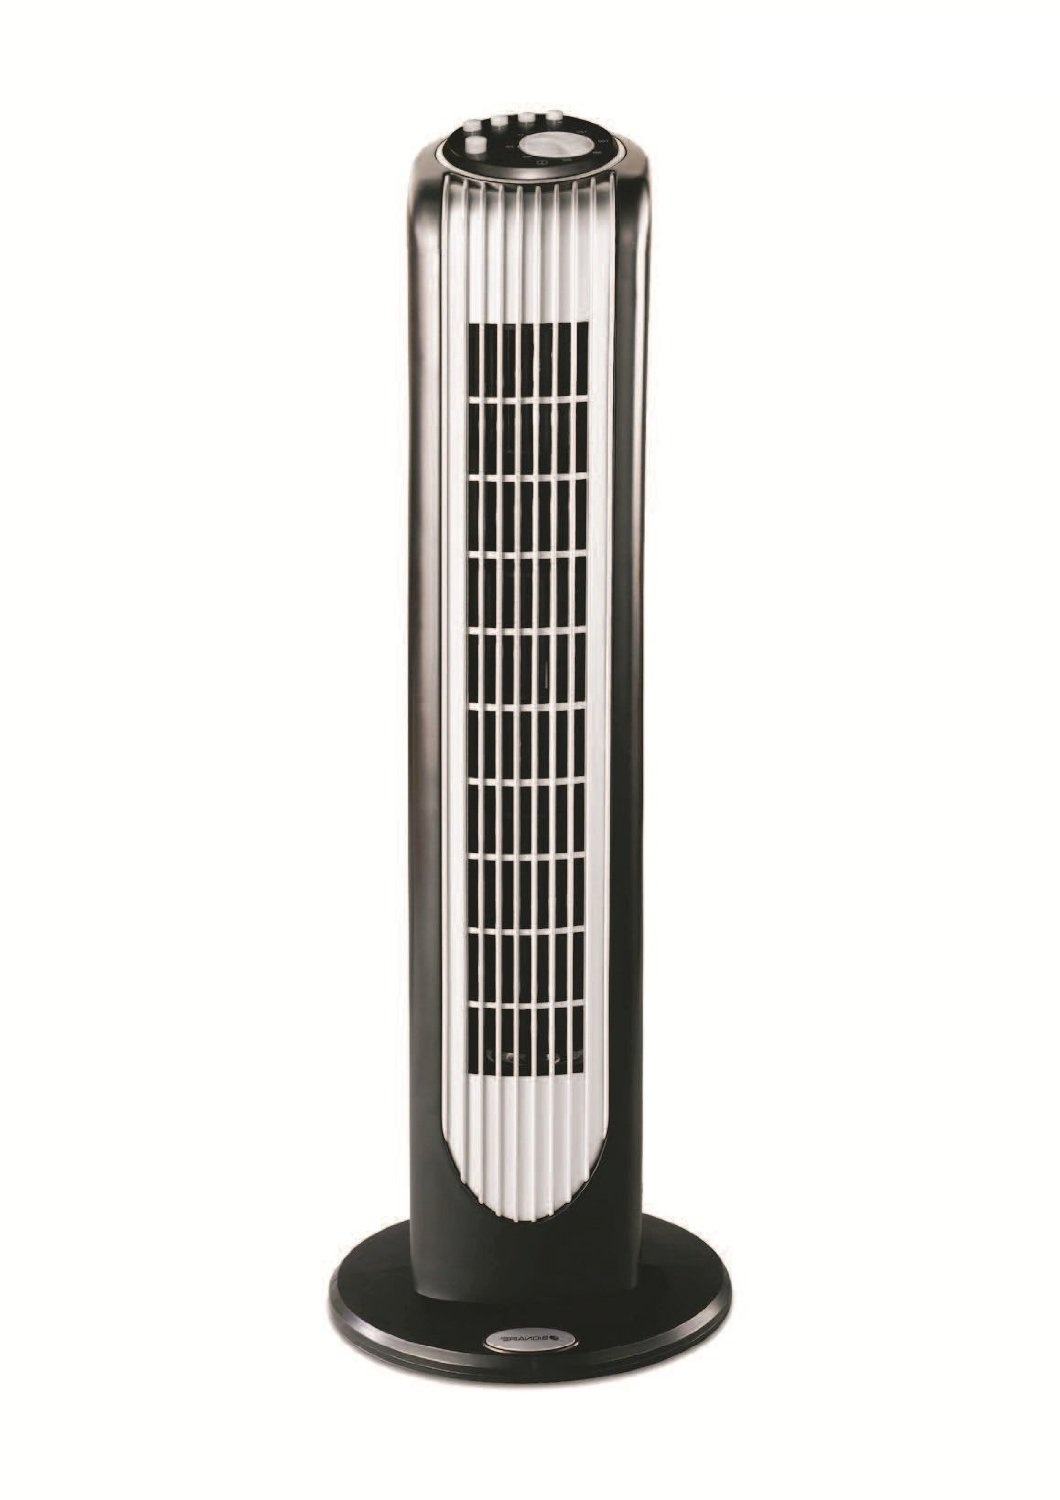 Oster Ot14bs 049 40 Watt Tower Fan Black And Silver within measurements 1060 X 1500